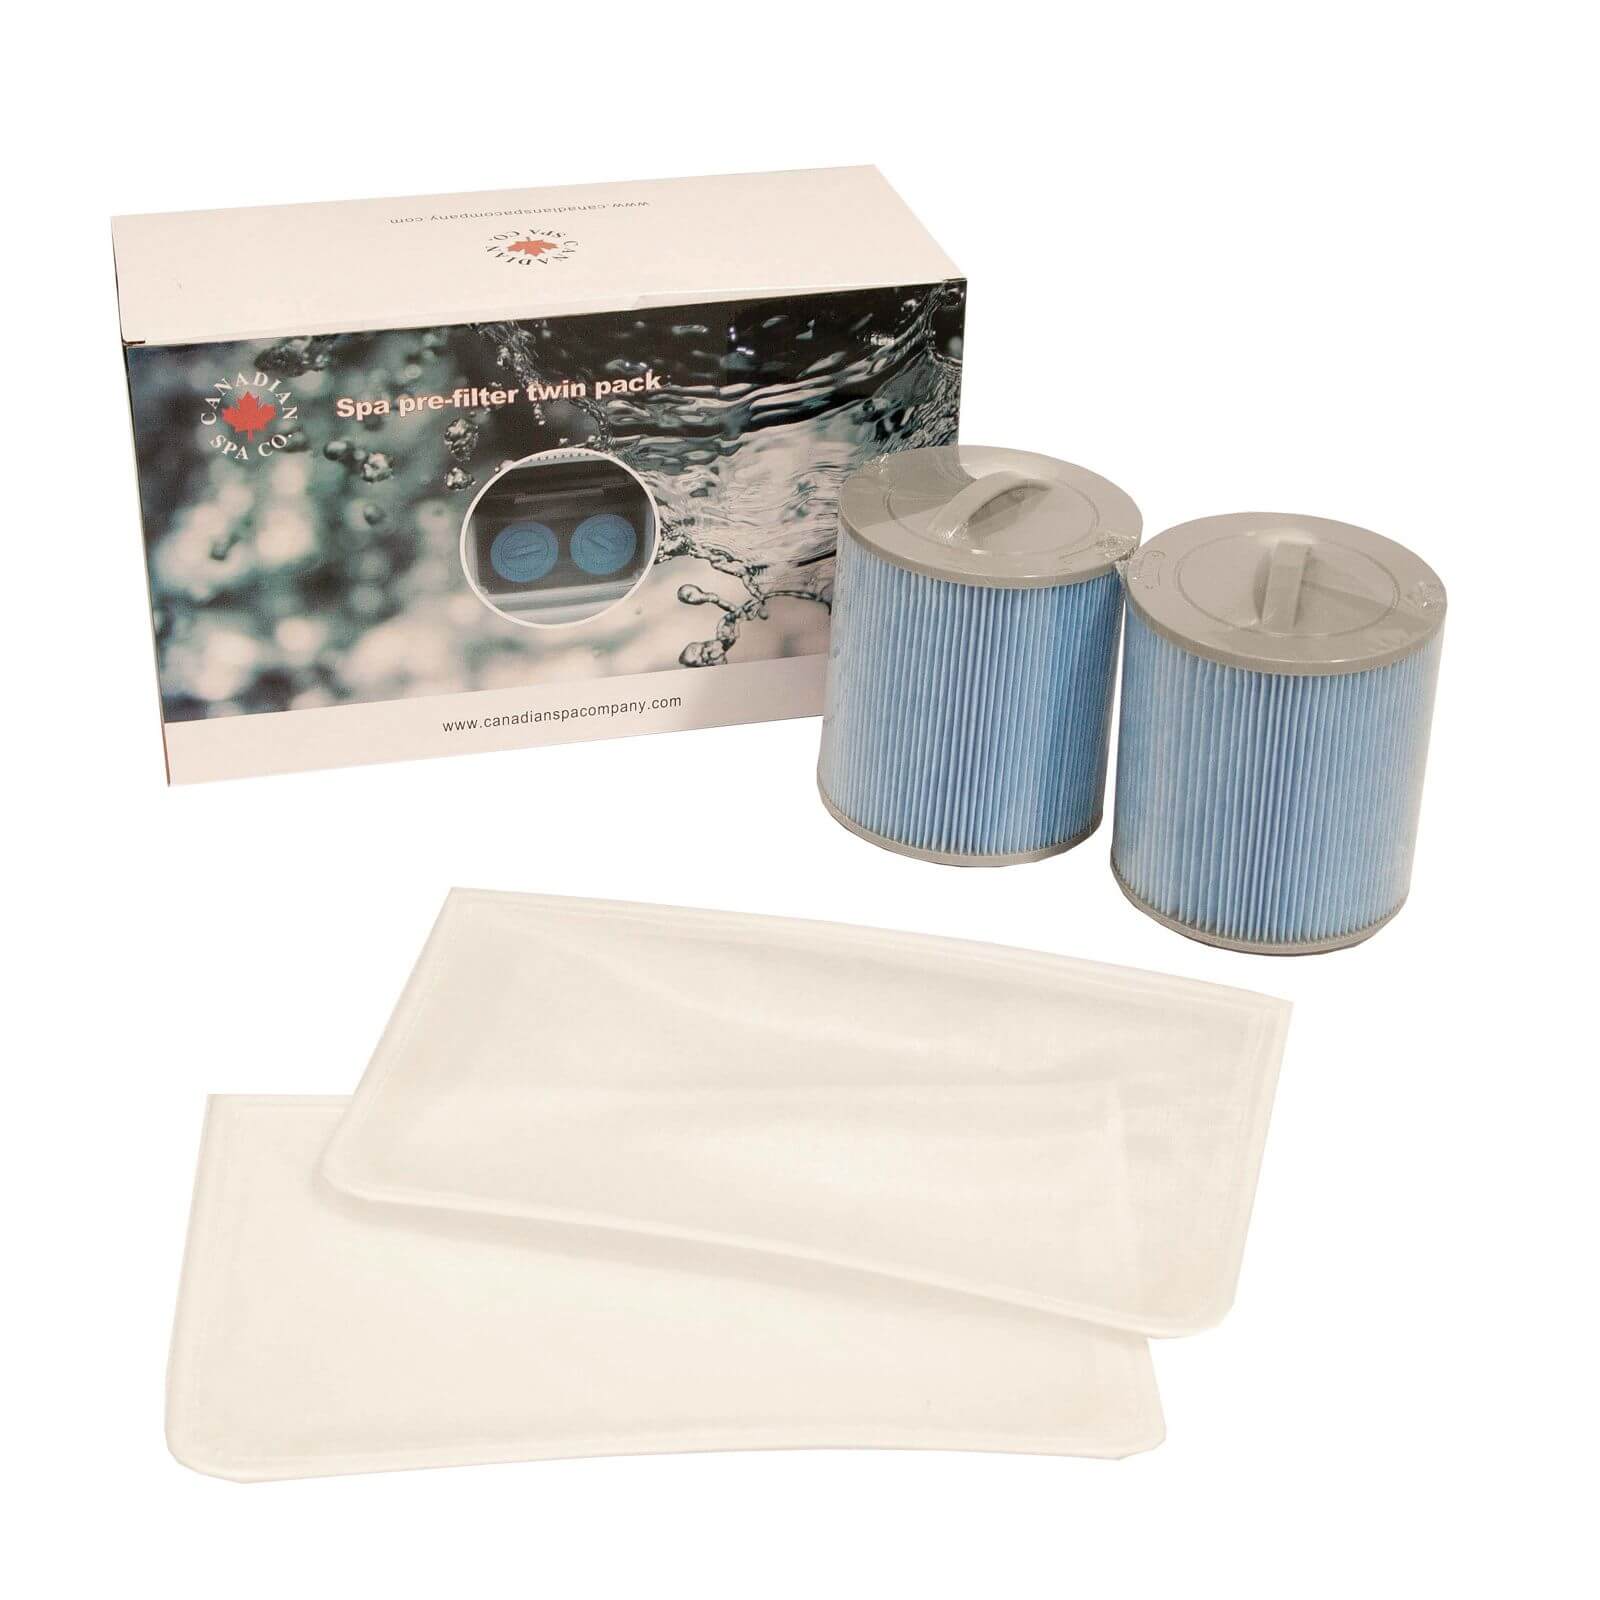 Canadian Spa Filters for Acrylic Spa